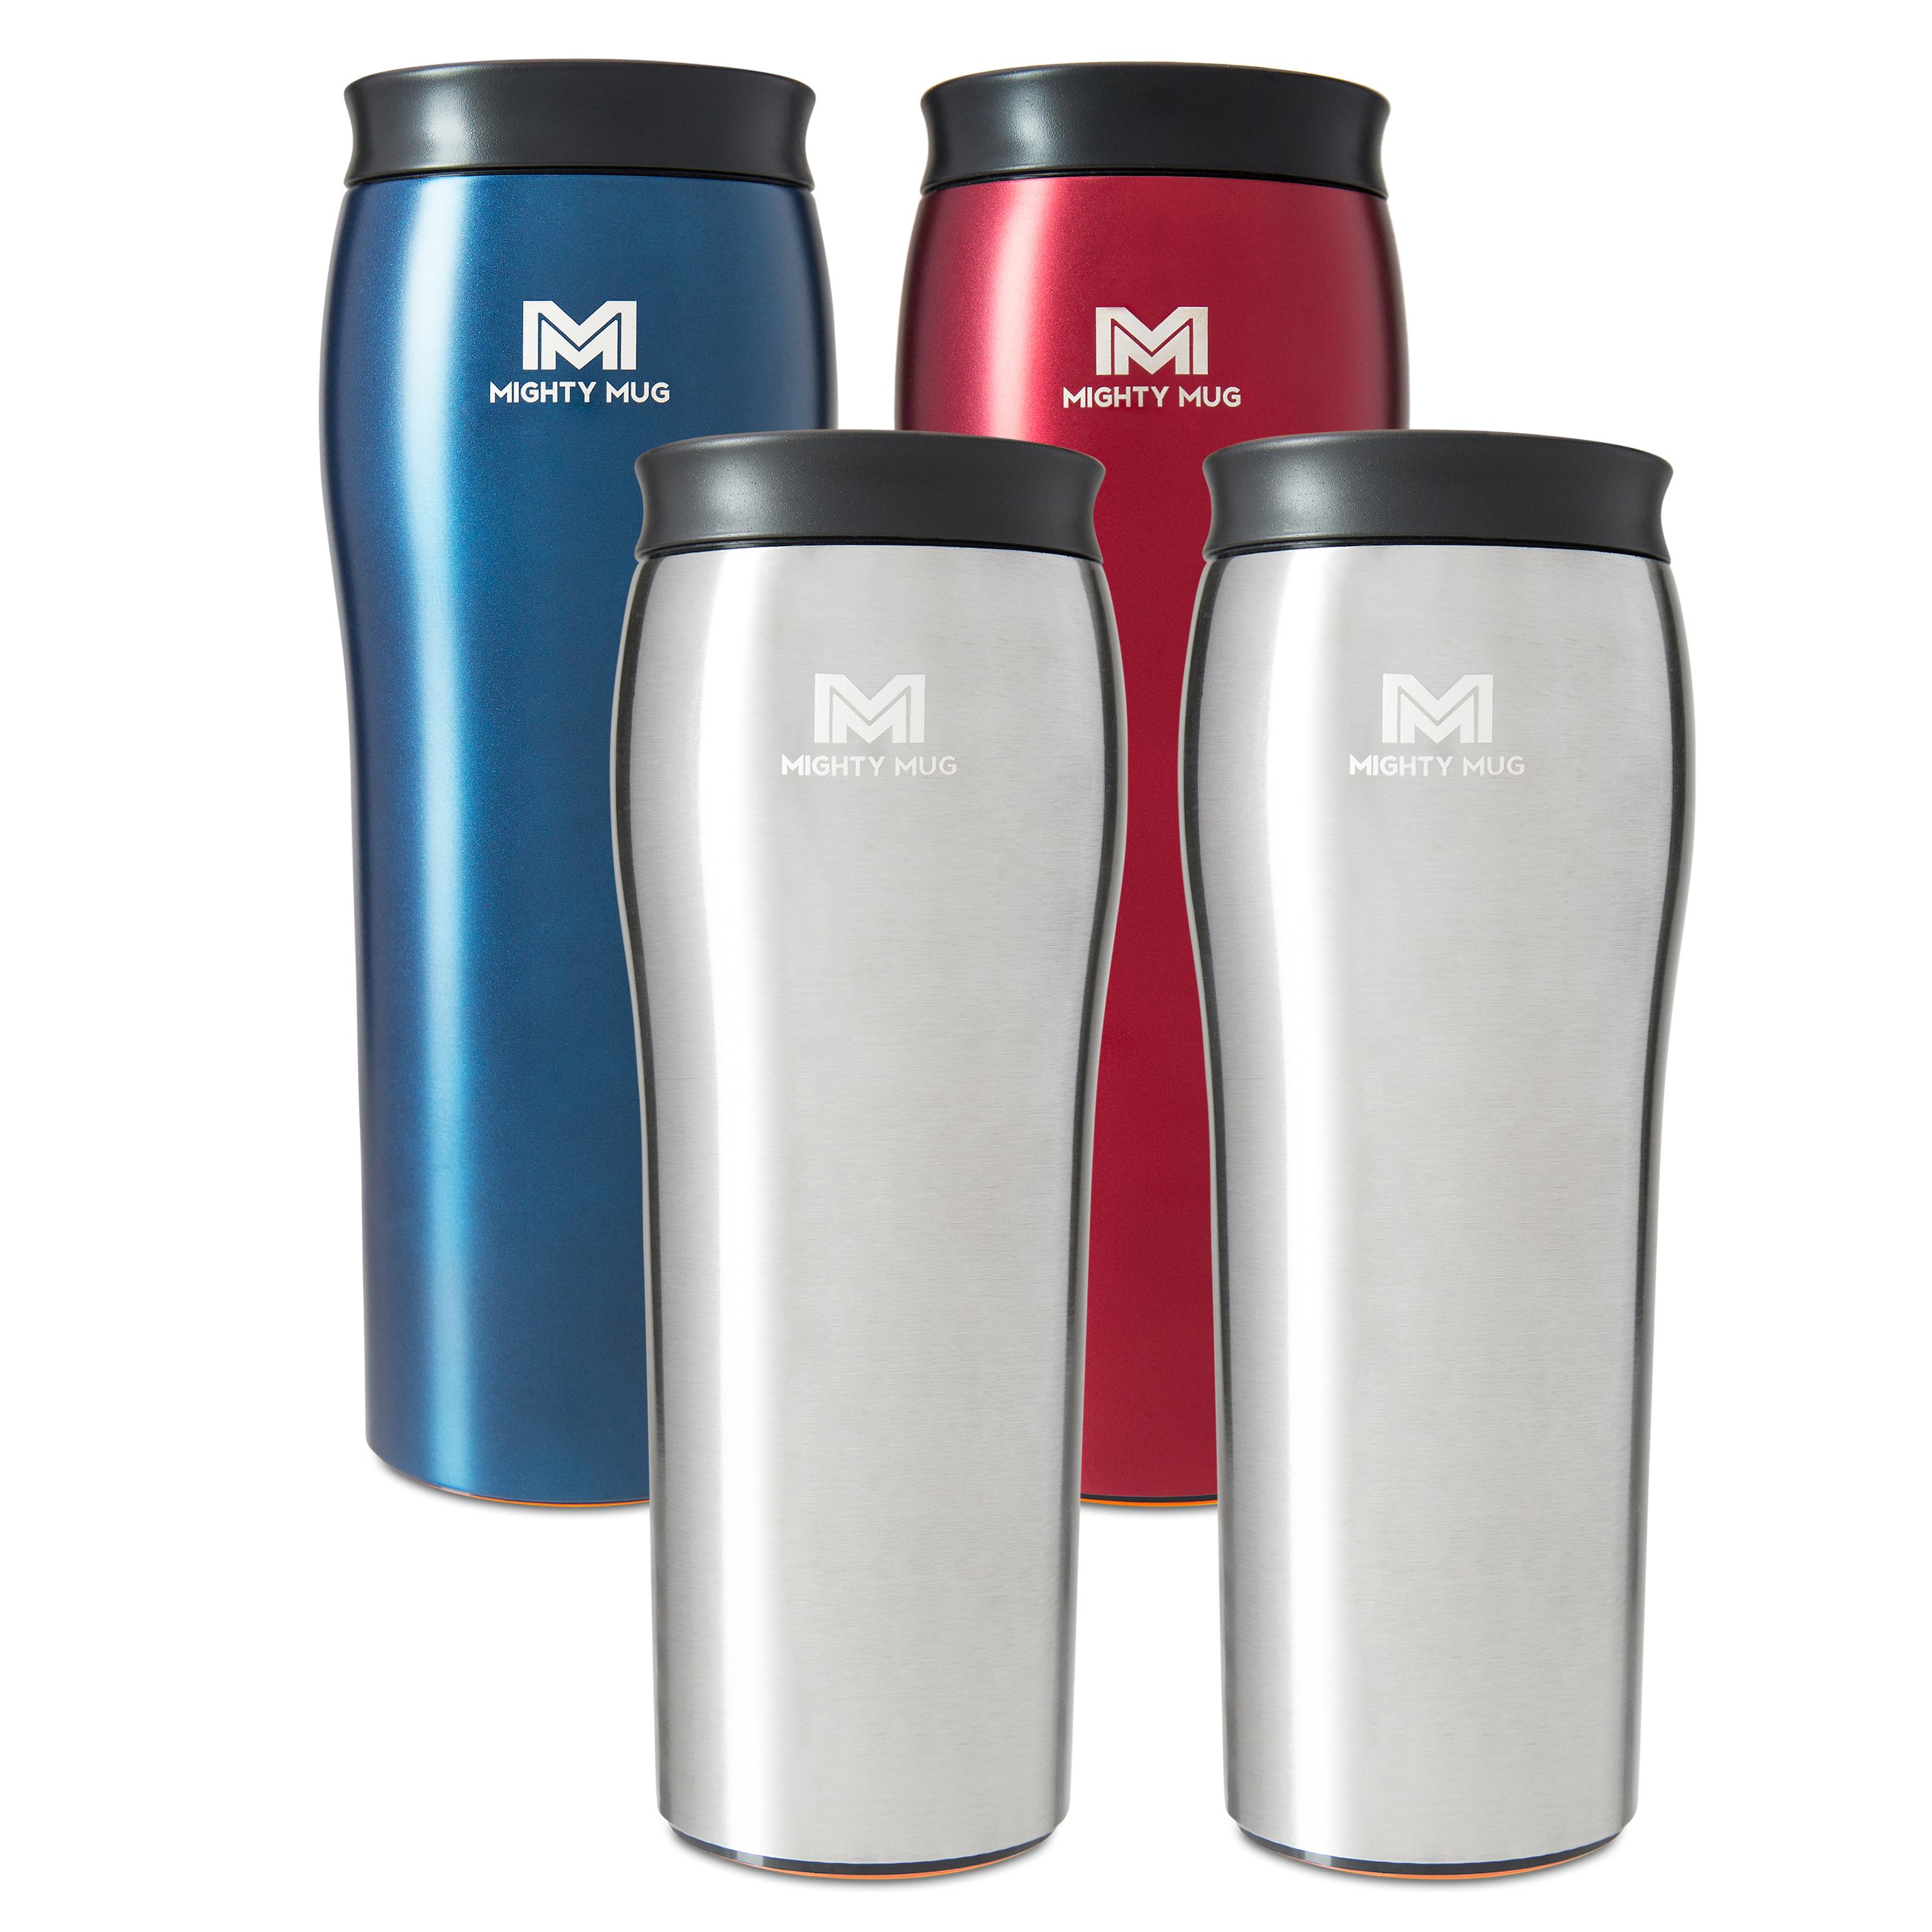 Mighty Mug | The Untippable Mug | Grips When Hit, Lifts for Sips |  Insulated Stainless Steel Tumbler…See more Mighty Mug | The Untippable Mug  | Grips